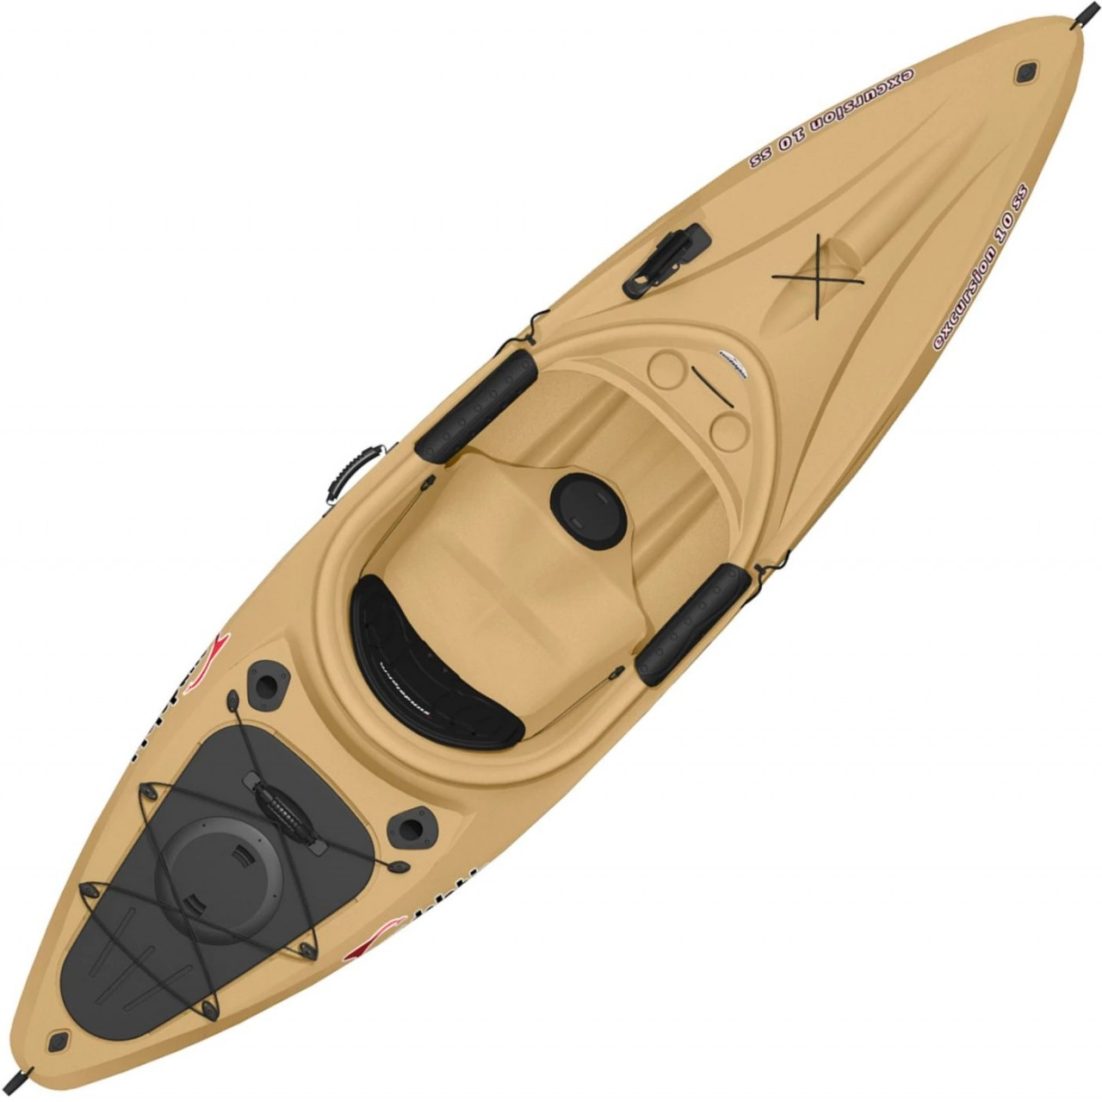 Sun Dolphin Excursion 10 SS Angler Kayak 72142 scaled